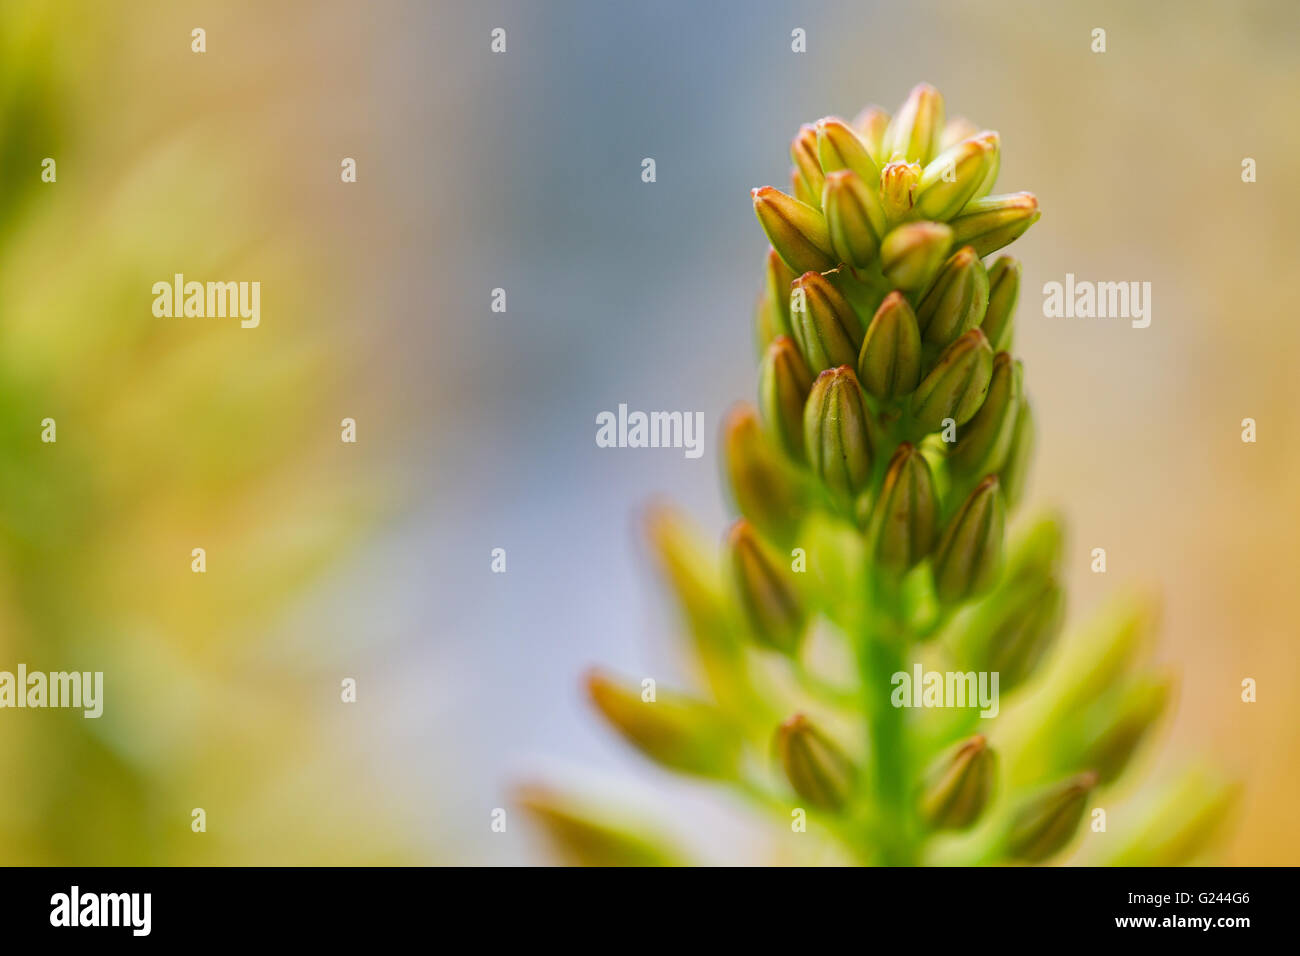 close up of eremurus foxtail lily or flower Stock Photo